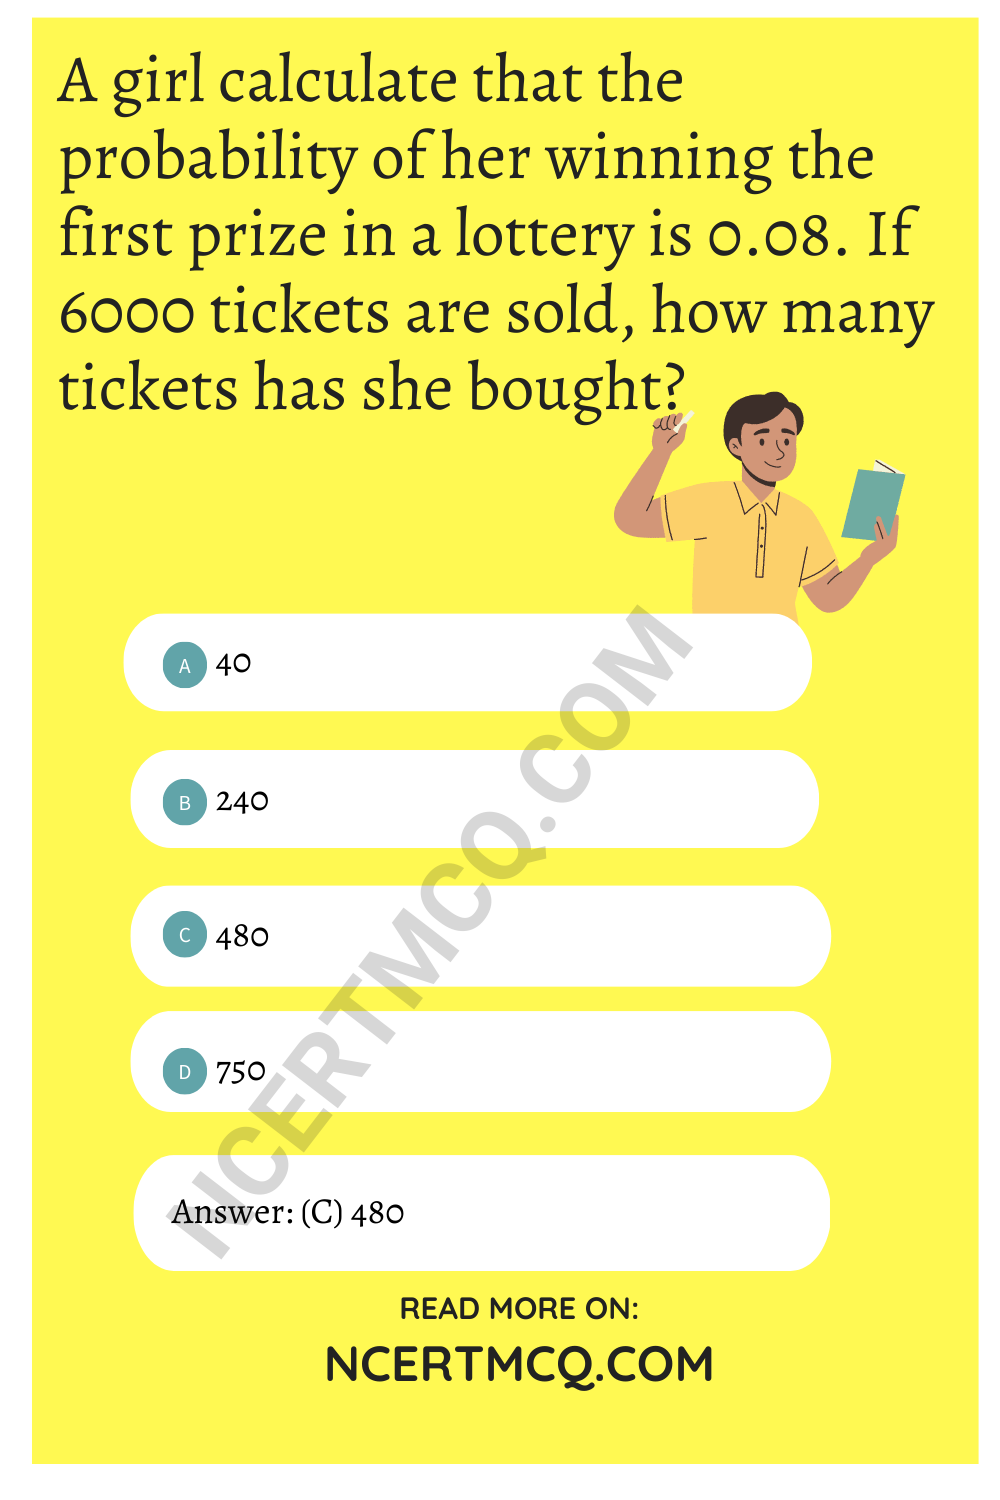 A girl calculate that the probability of her winning the first prize in a lottery is 0.08. If 6000 tickets are sold, how many tickets has she bought?